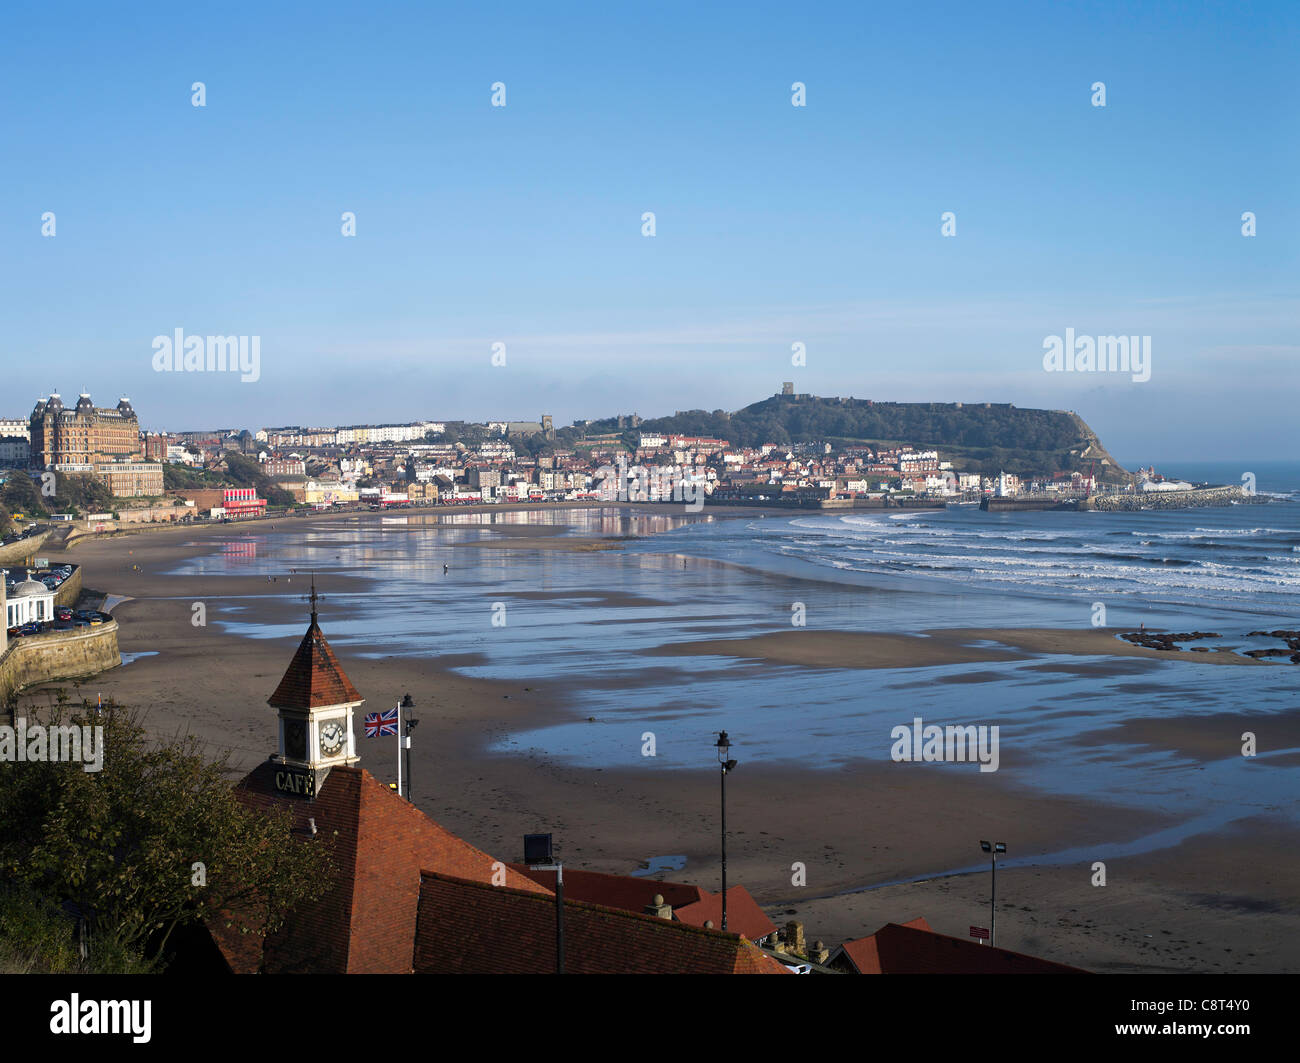 dh South Bay SCARBOROUGH NORTH YORKSHIRE autumn sea side beach town bay cafe clock uk seaside Stock Photo